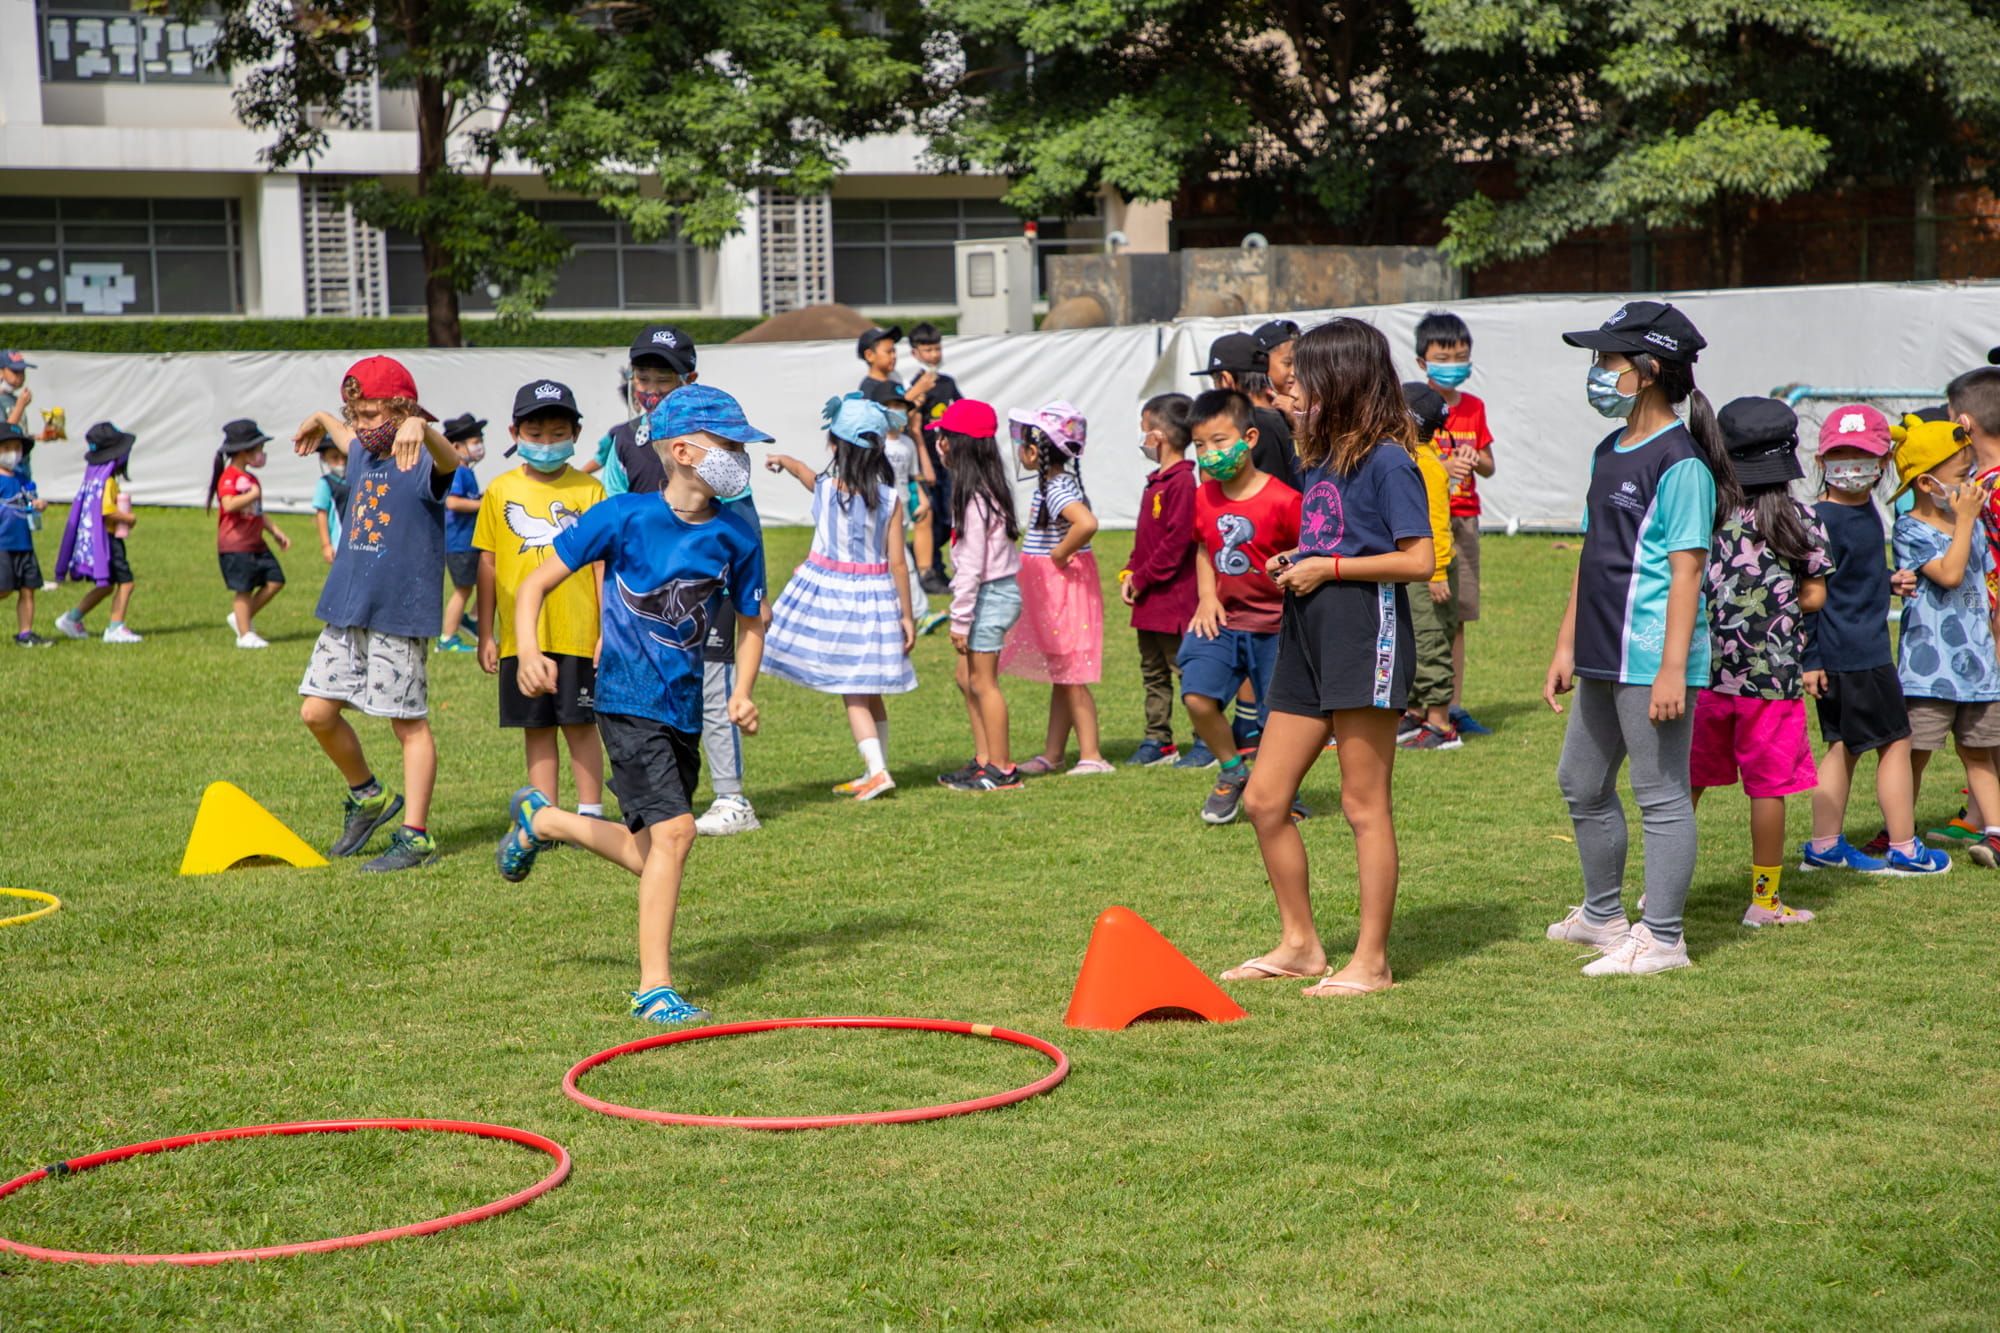 Demonstrating service through action: why we're proud of the Northbridge Primary Action Squad-demonstrating-service-through-action-why-were-proud-of-the-northbridge-primary-action-squad-House Relay Obstacle Course 3